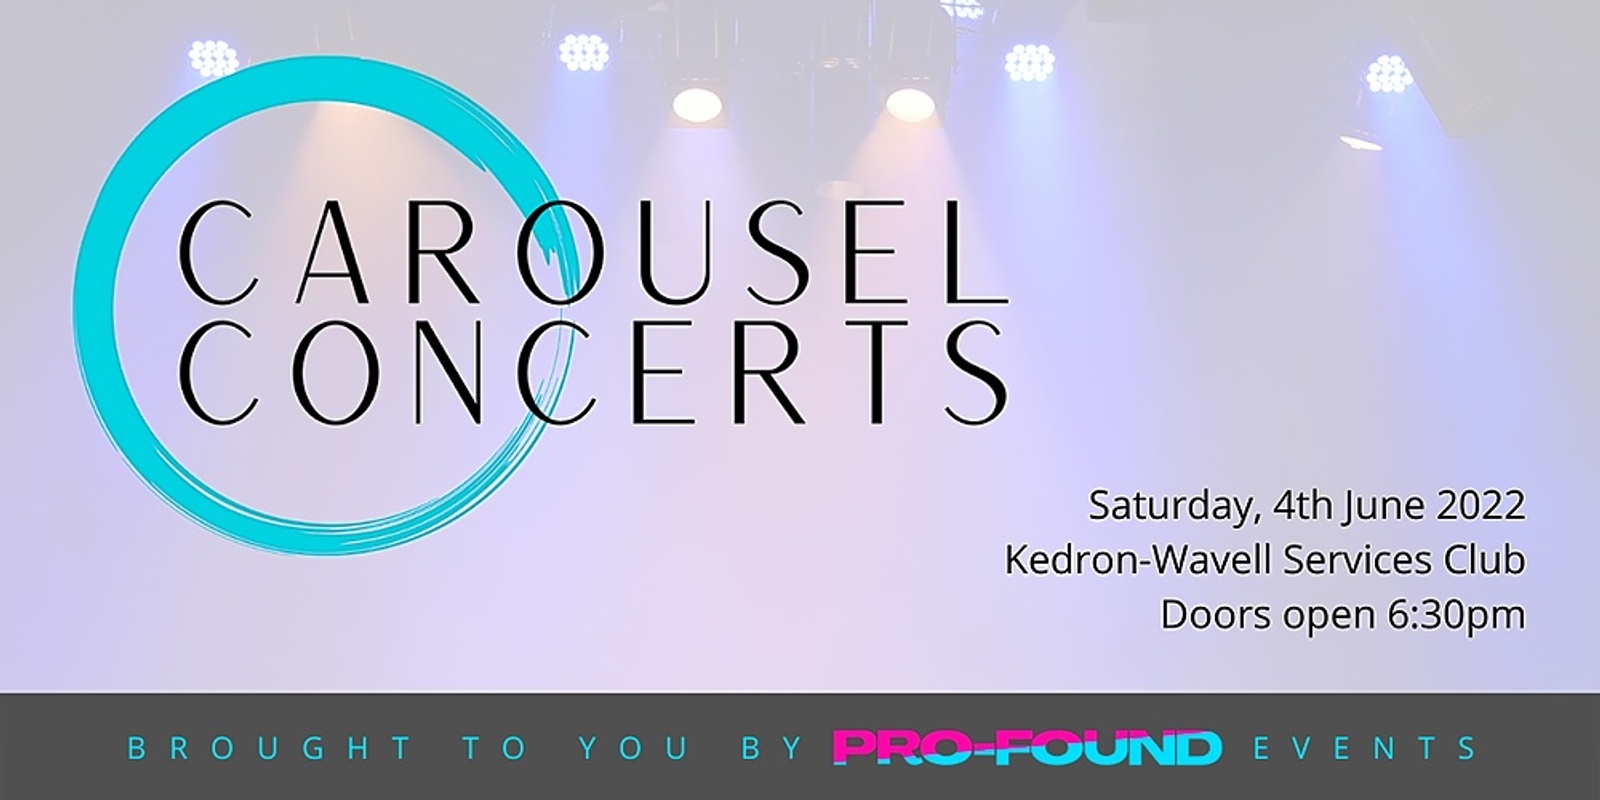 Banner image for Carousel Concerts by Pro-Found Events